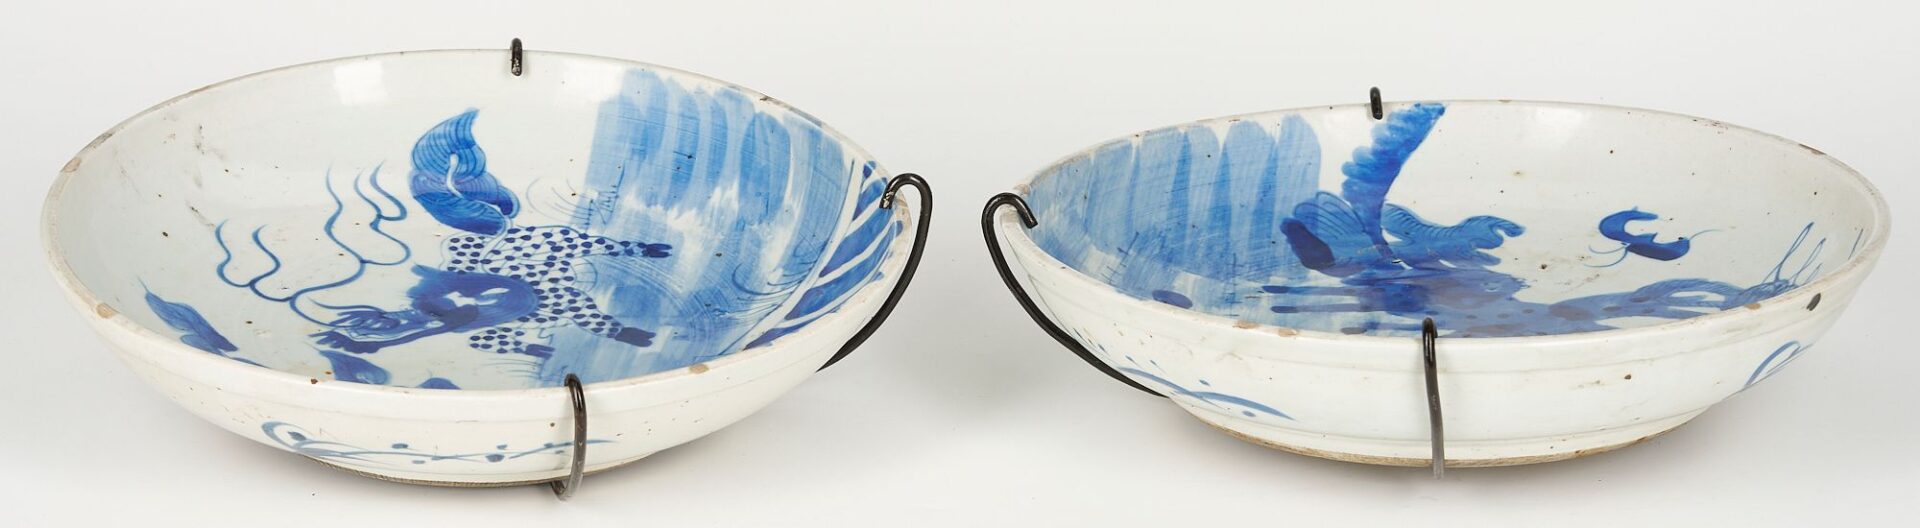 Lot 888: Pr. of Chinese Blue & White Porcelain Chargers